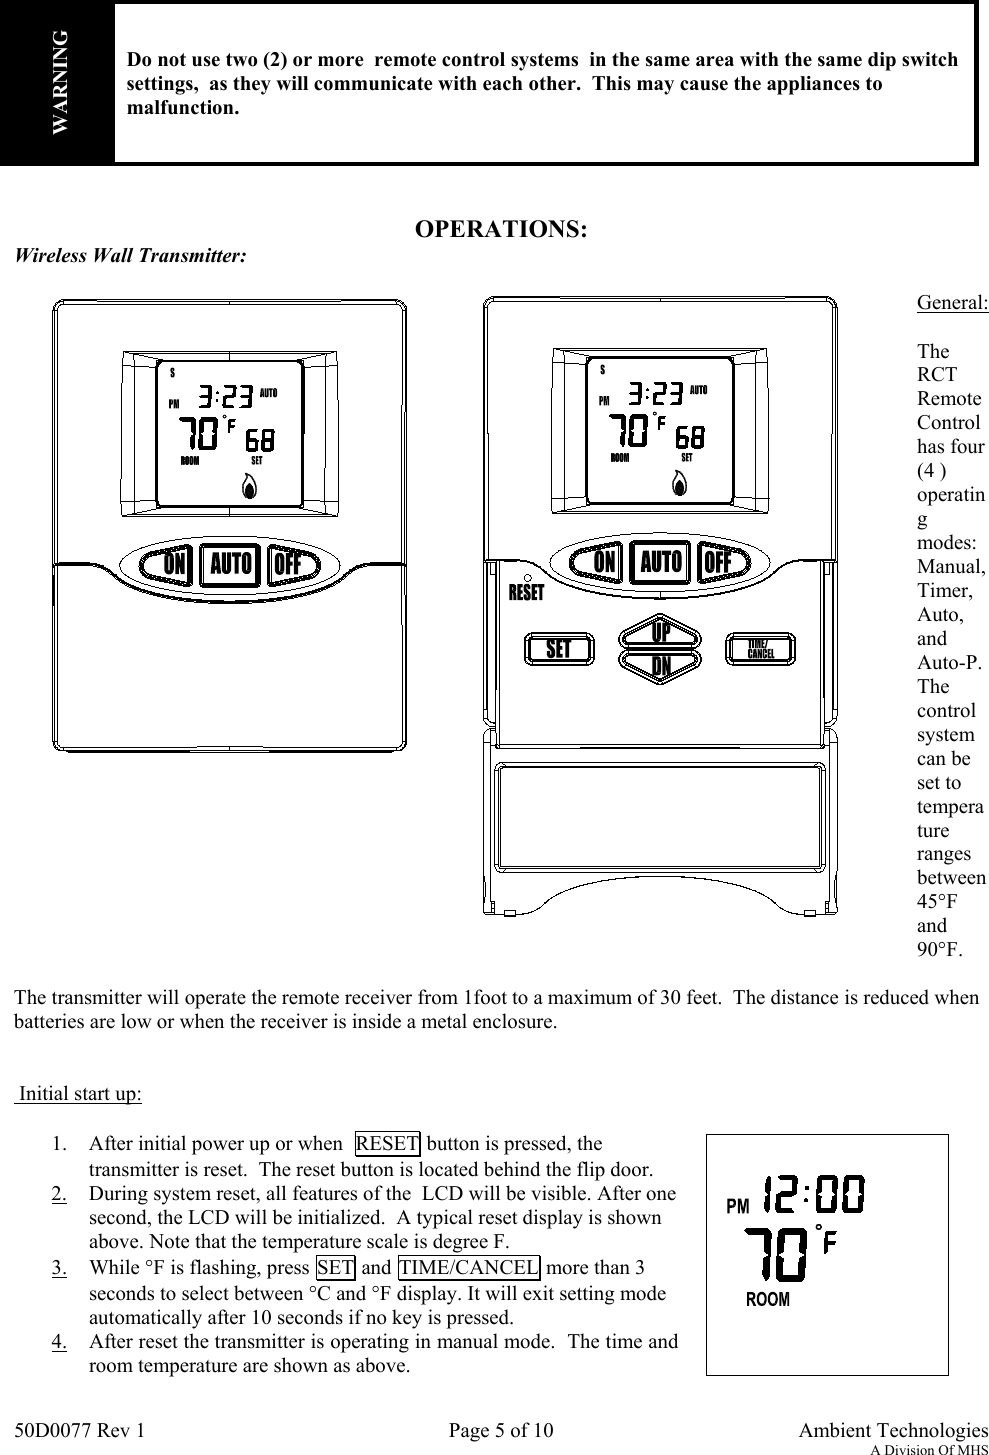 50D0077 Rev 1 Page 5 of 10  Ambient TechnologiesA Division Of MHSOPERATIONS:Wireless Wall Transmitter:General:TheRCTRemoteControlhas four(4 )operatingmodes:Manual,Timer,Auto,andAuto-P.Thecontrolsystemcan beset totemperaturerangesbetween45°Fand90°F.The transmitter will operate the remote receiver from 1foot to a maximum of 30 feet.  The distance is reduced whenbatteries are low or when the receiver is inside a metal enclosure. Initial start up:1. After initial power up or when  RESET button is pressed, thetransmitter is reset.  The reset button is located behind the flip door.2. During system reset, all features of the  LCD will be visible. After onesecond, the LCD will be initialized.  A typical reset display is shownabove. Note that the temperature scale is degree F.3. While °F is flashing, press SET and TIME/CANCEL more than 3seconds to select between °C and °F display. It will exit setting modeautomatically after 10 seconds if no key is pressed.4. After reset the transmitter is operating in manual mode.  The time androom temperature are shown as above.WARNINGDo not use two (2) or more  remote control systems  in the same area with the same dip switchsettings,  as they will communicate with each other.  This may cause the appliances tomalfunction.